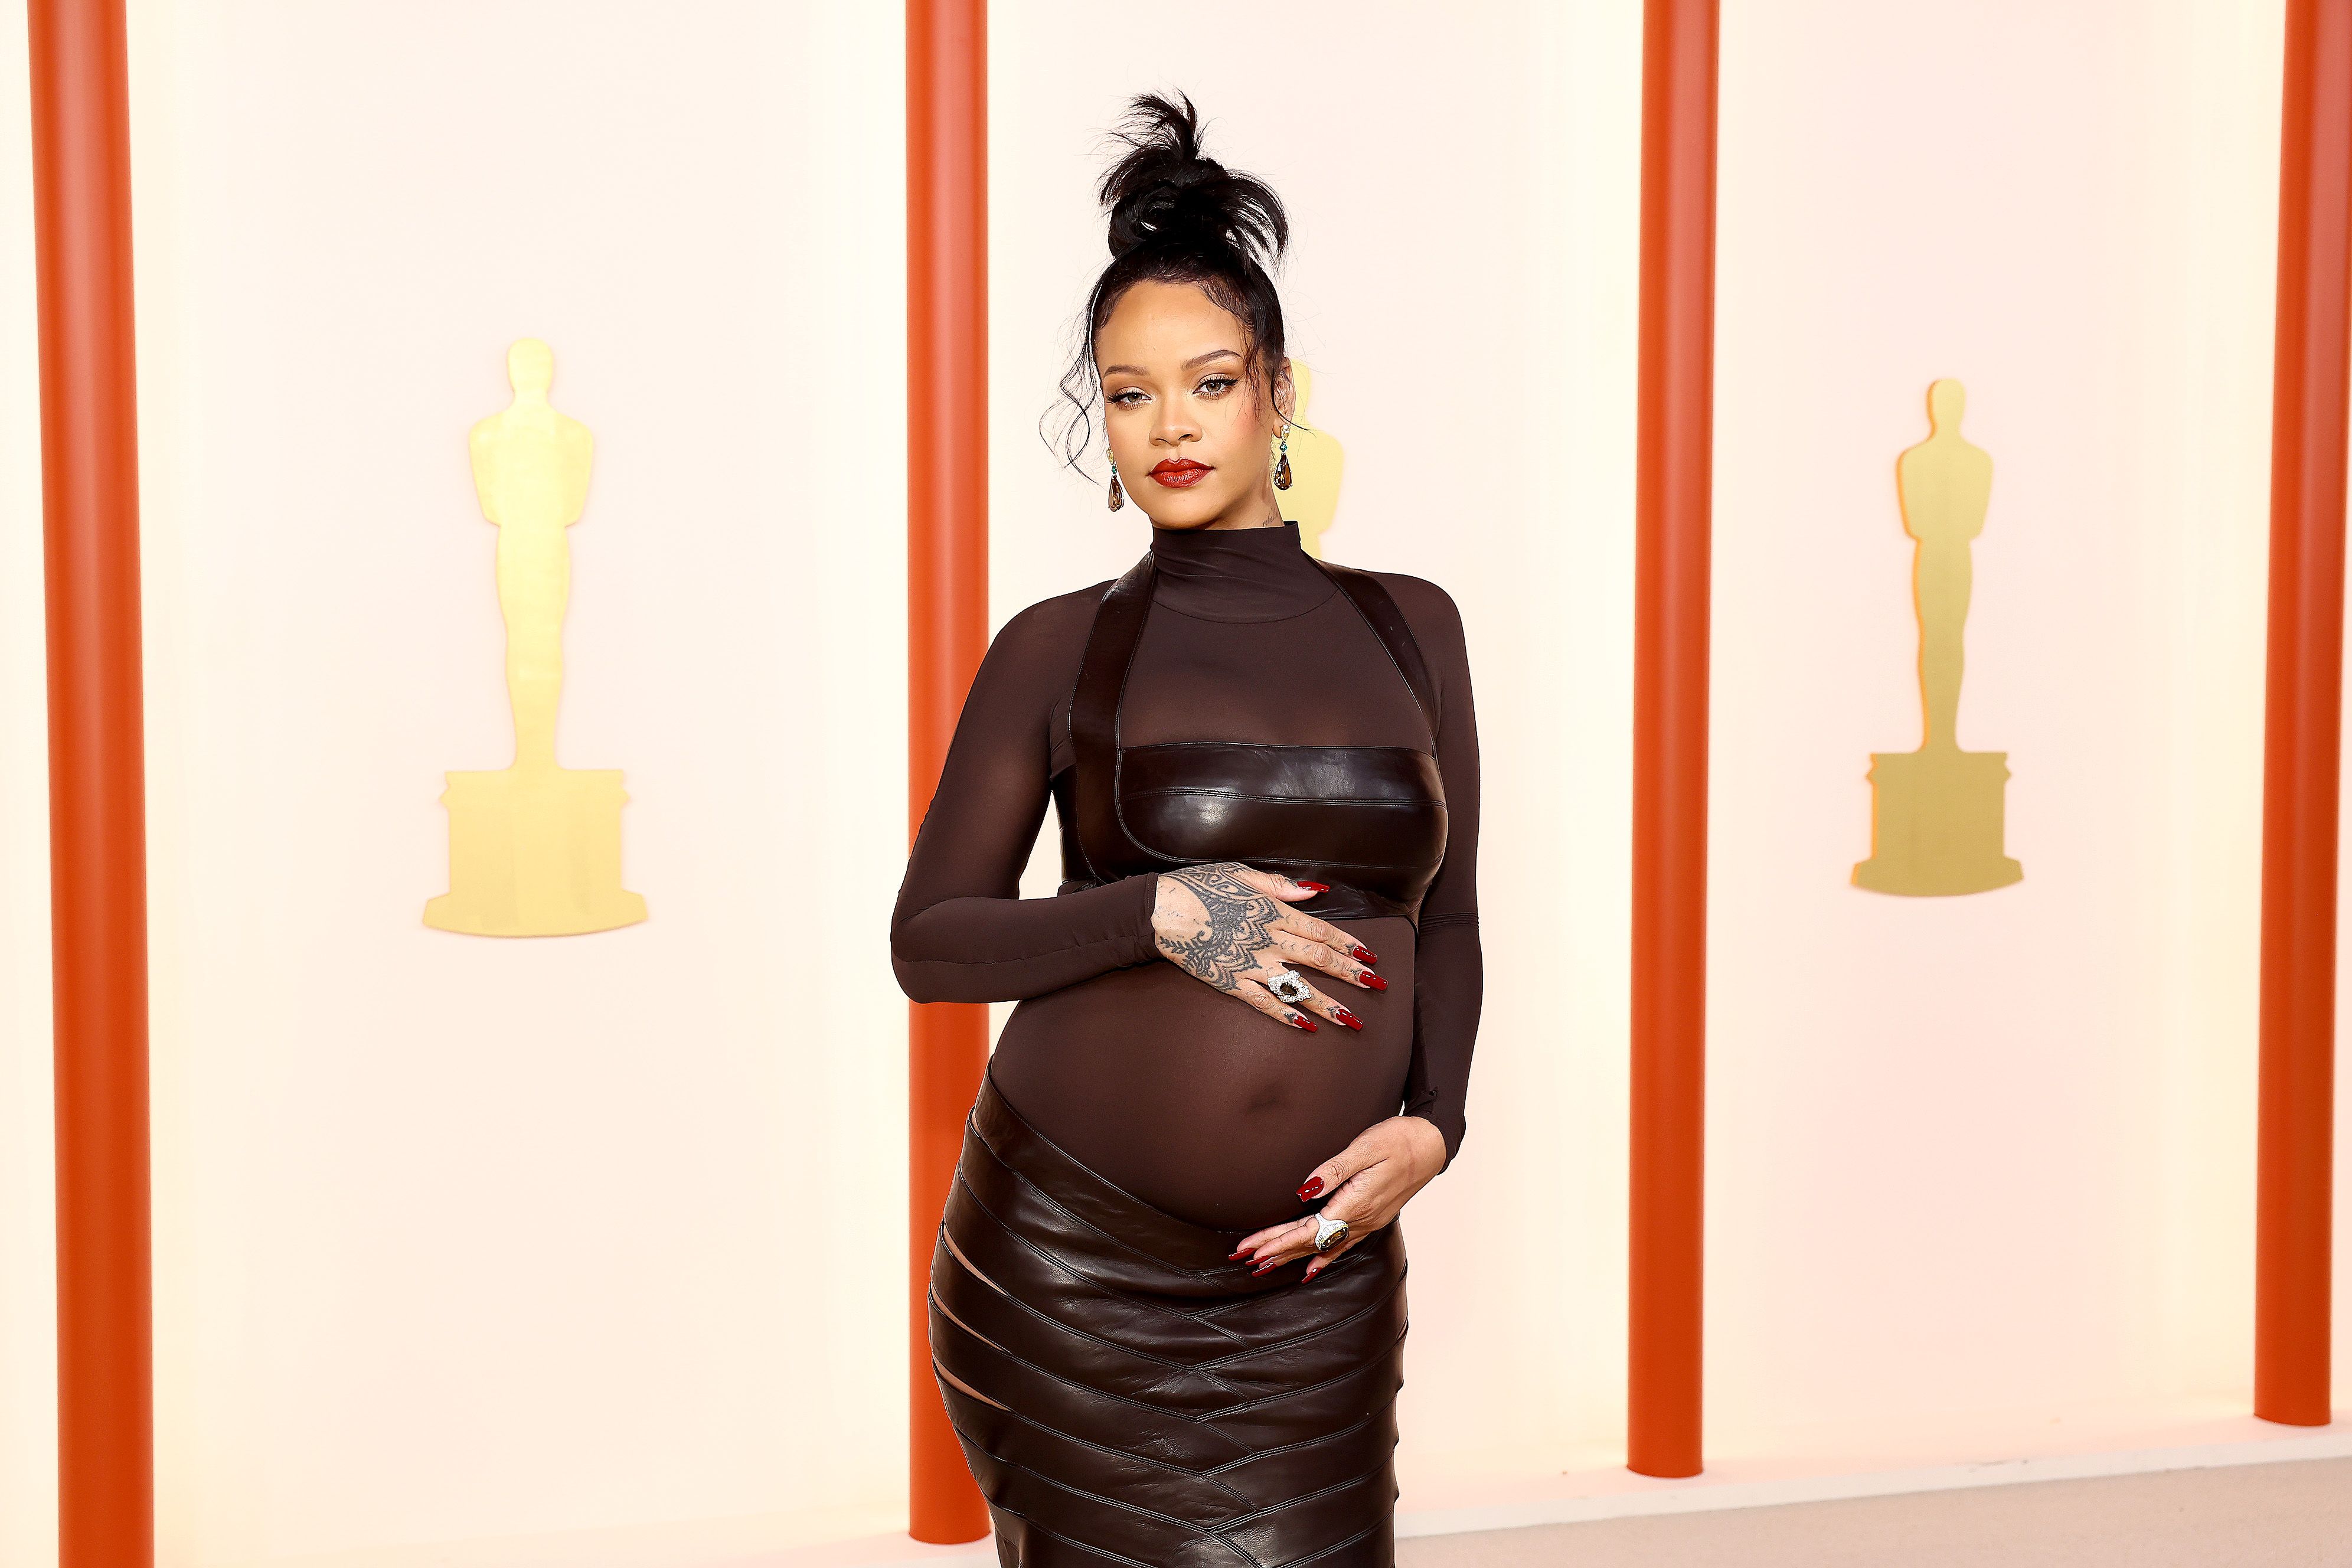 Pregnant Rihanna Is Due to Deliver Any Day Now